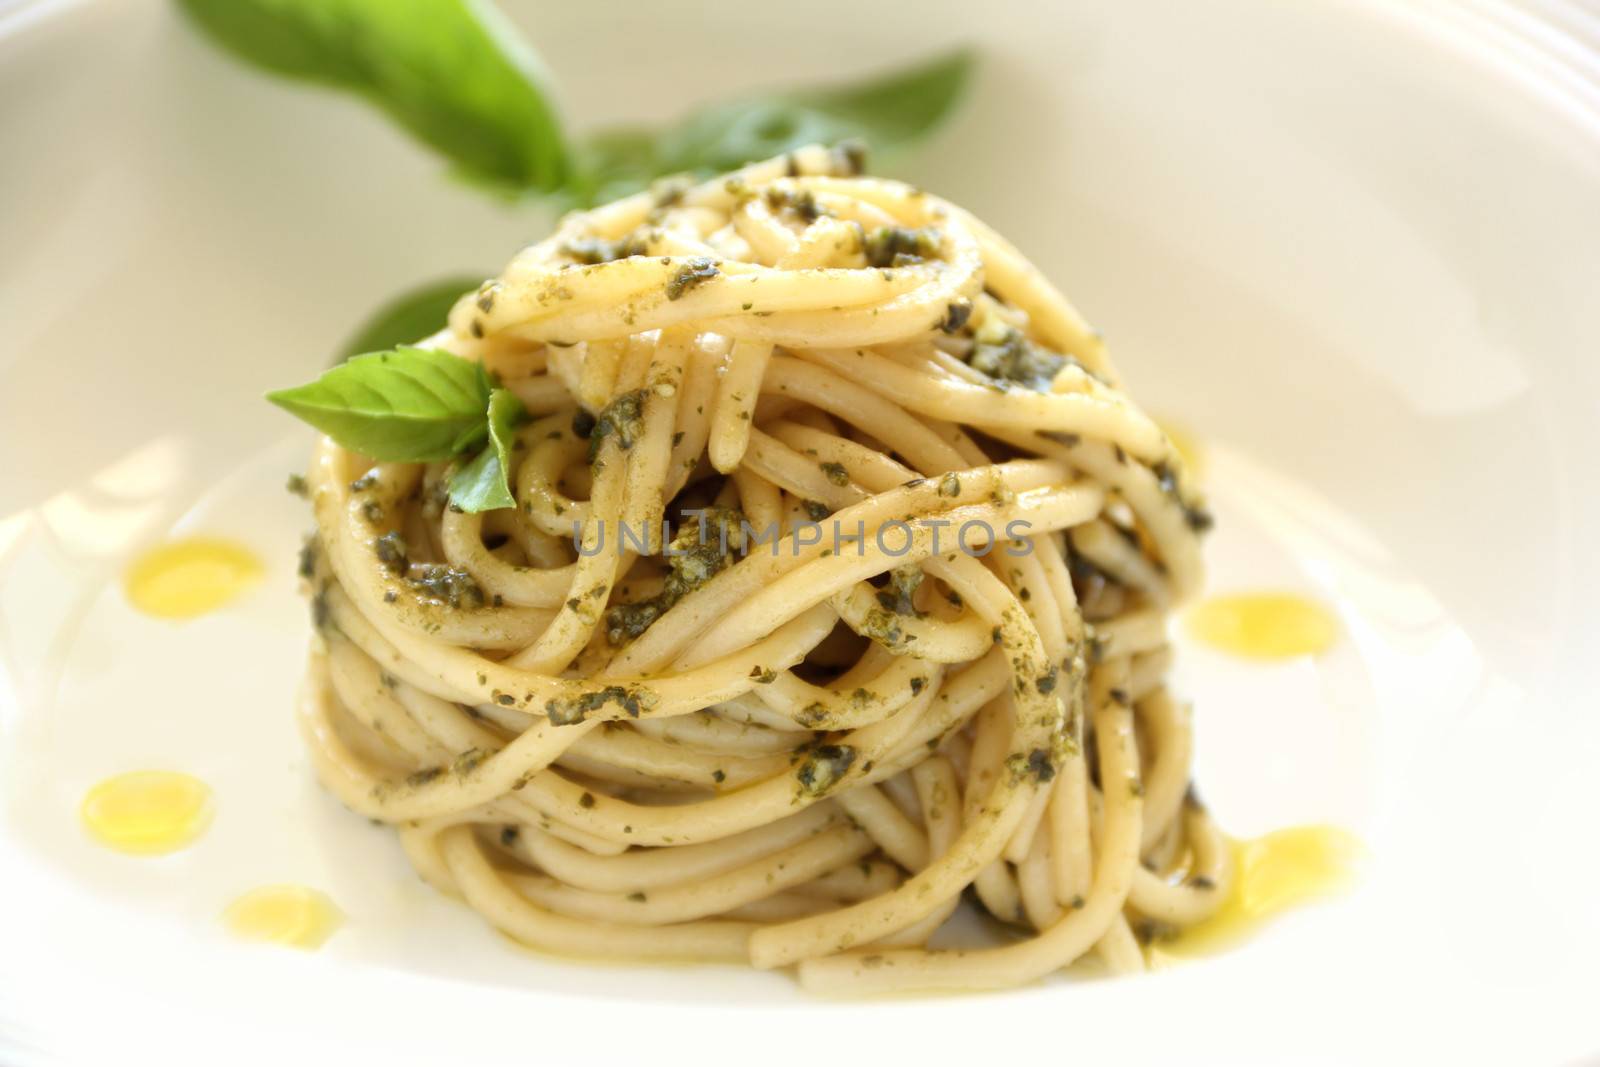 Delicious spaghetti with pesto with basil leaves ready to serve.